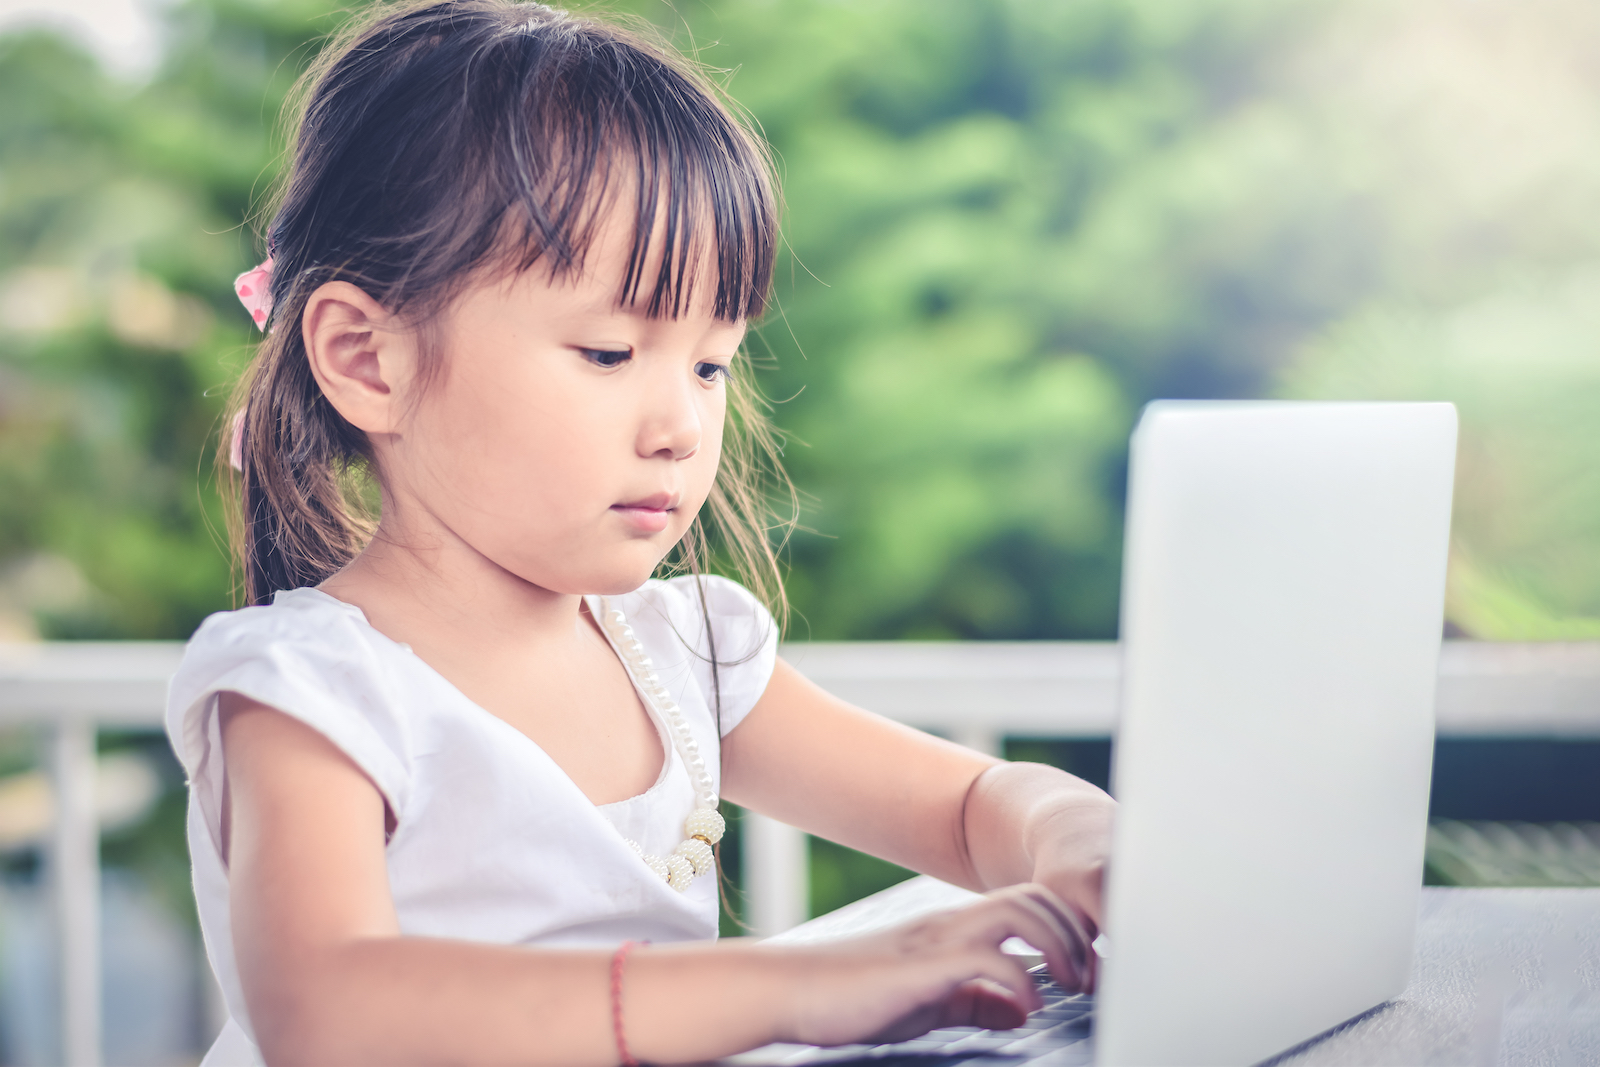 Asian little girl outdoors with smiley face using laptop in the garden at home. family activity concept.